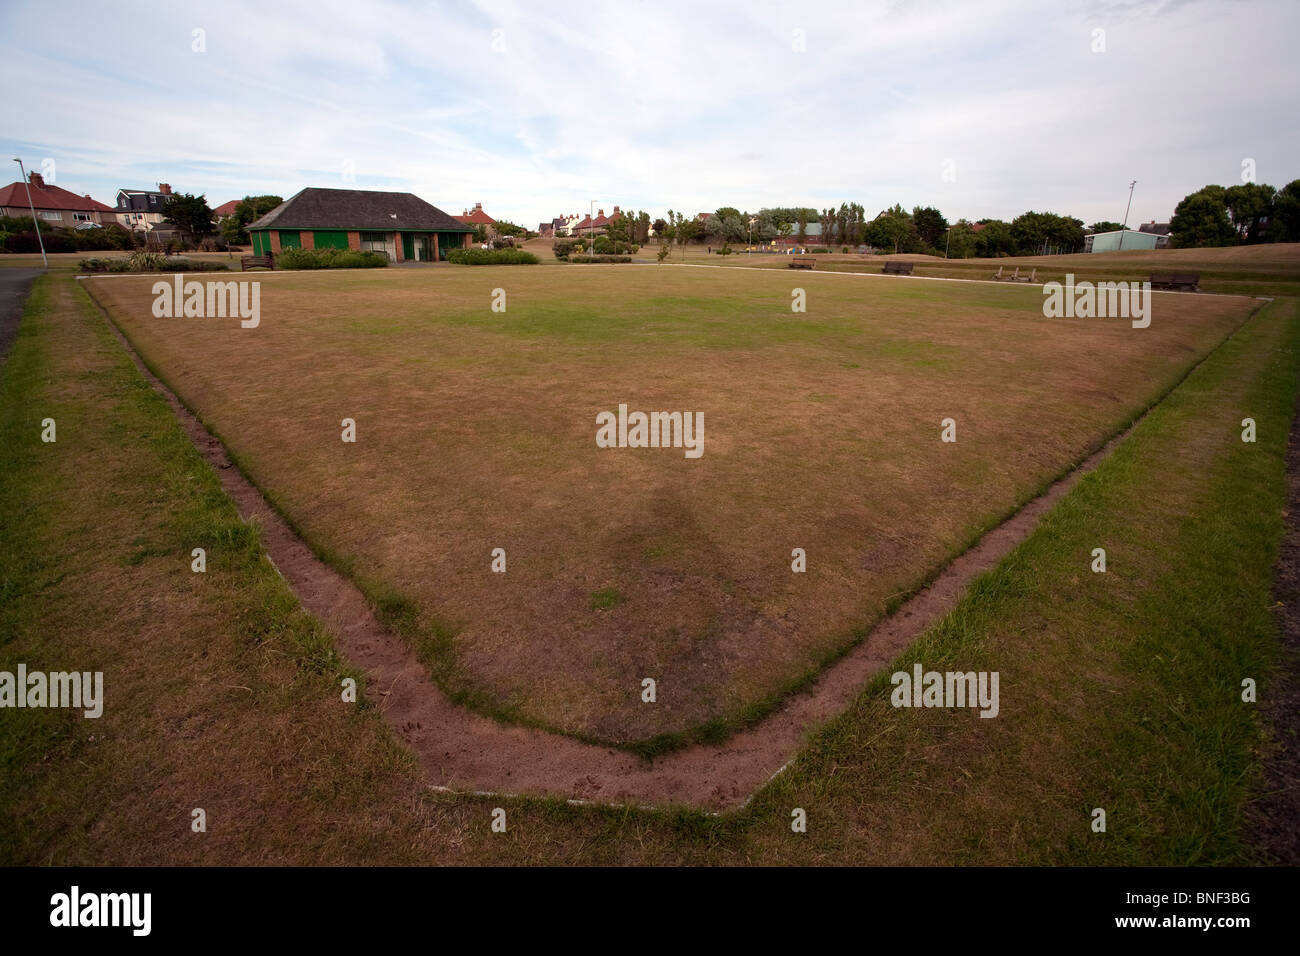 Hoylake bowling green in Queen's Park showing the effects of drought and a water shortage on the quality of the bowling surface. Stock Photo